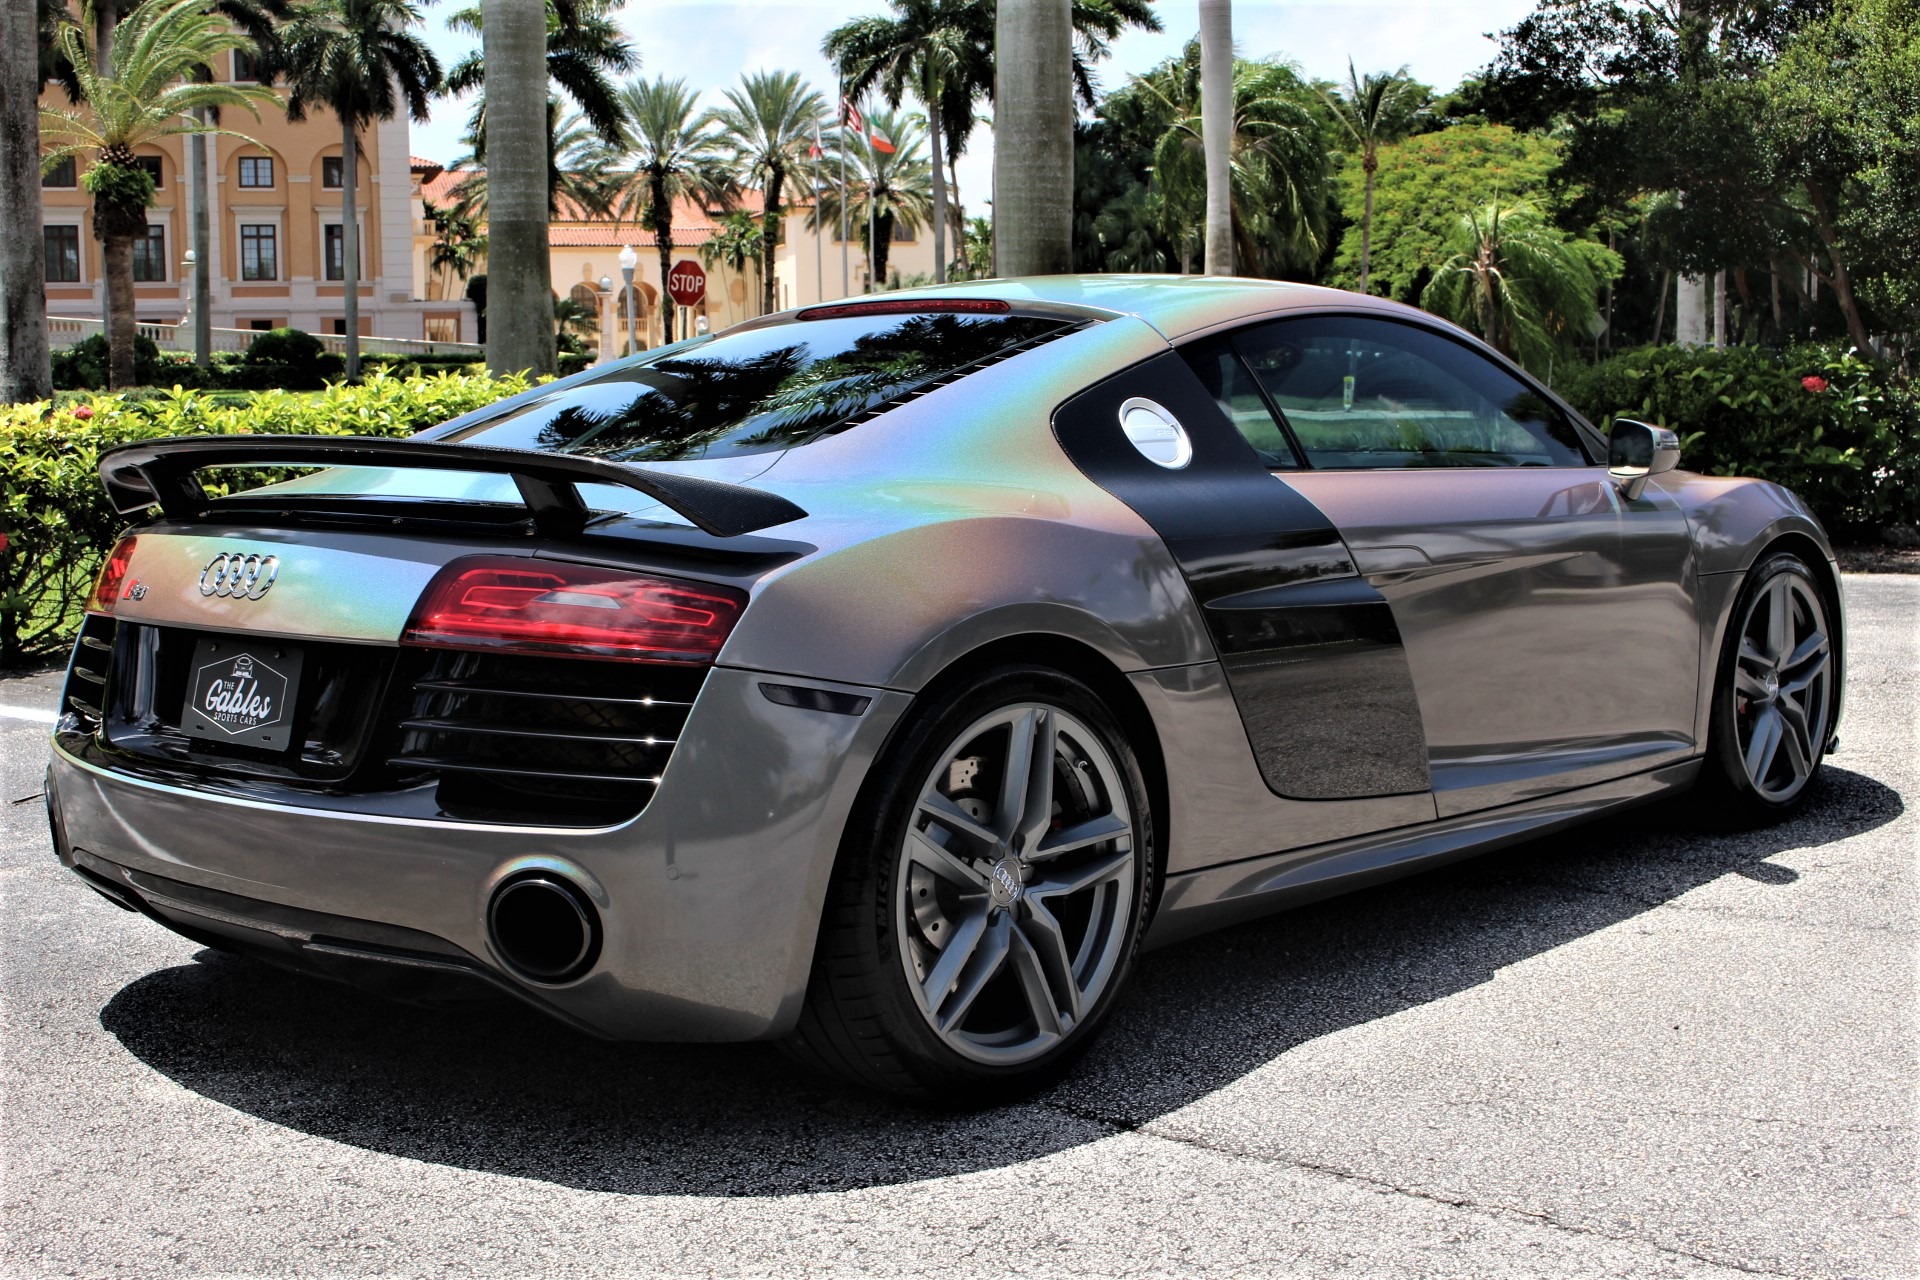 Used 2014 Audi R8 5.2 quattro for sale Sold at The Gables Sports Cars in Miami FL 33146 4